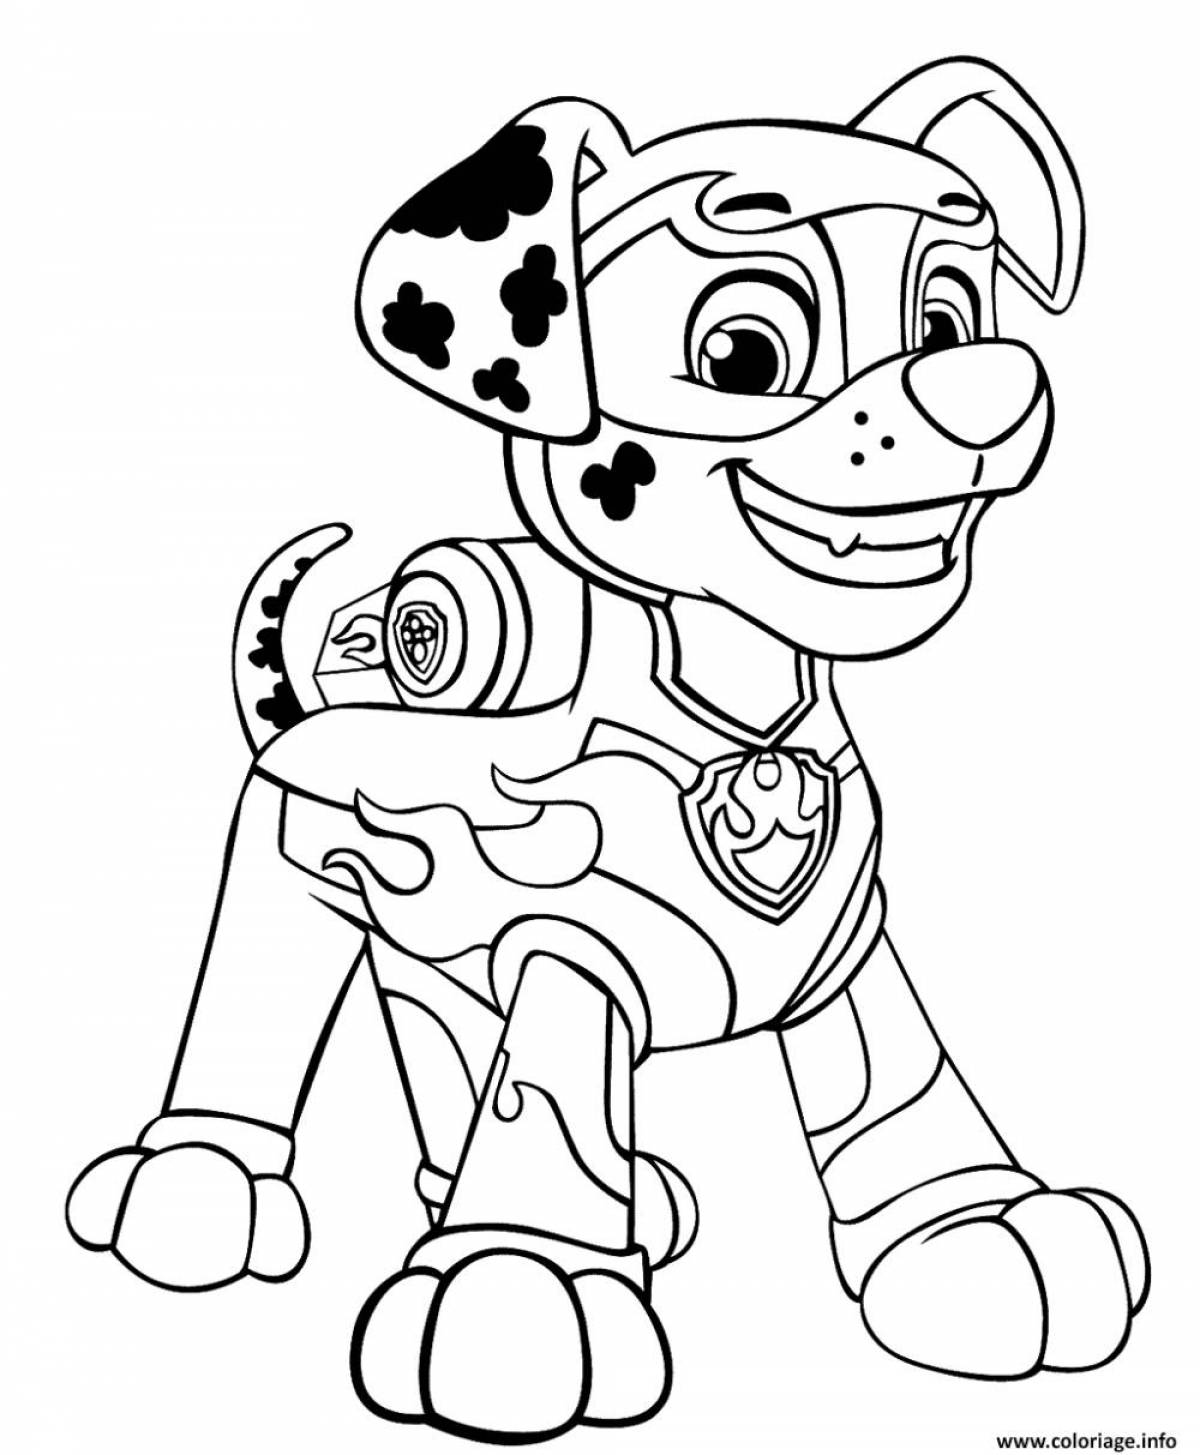 Live Paw Patrol coloring pages for 3-4 year olds